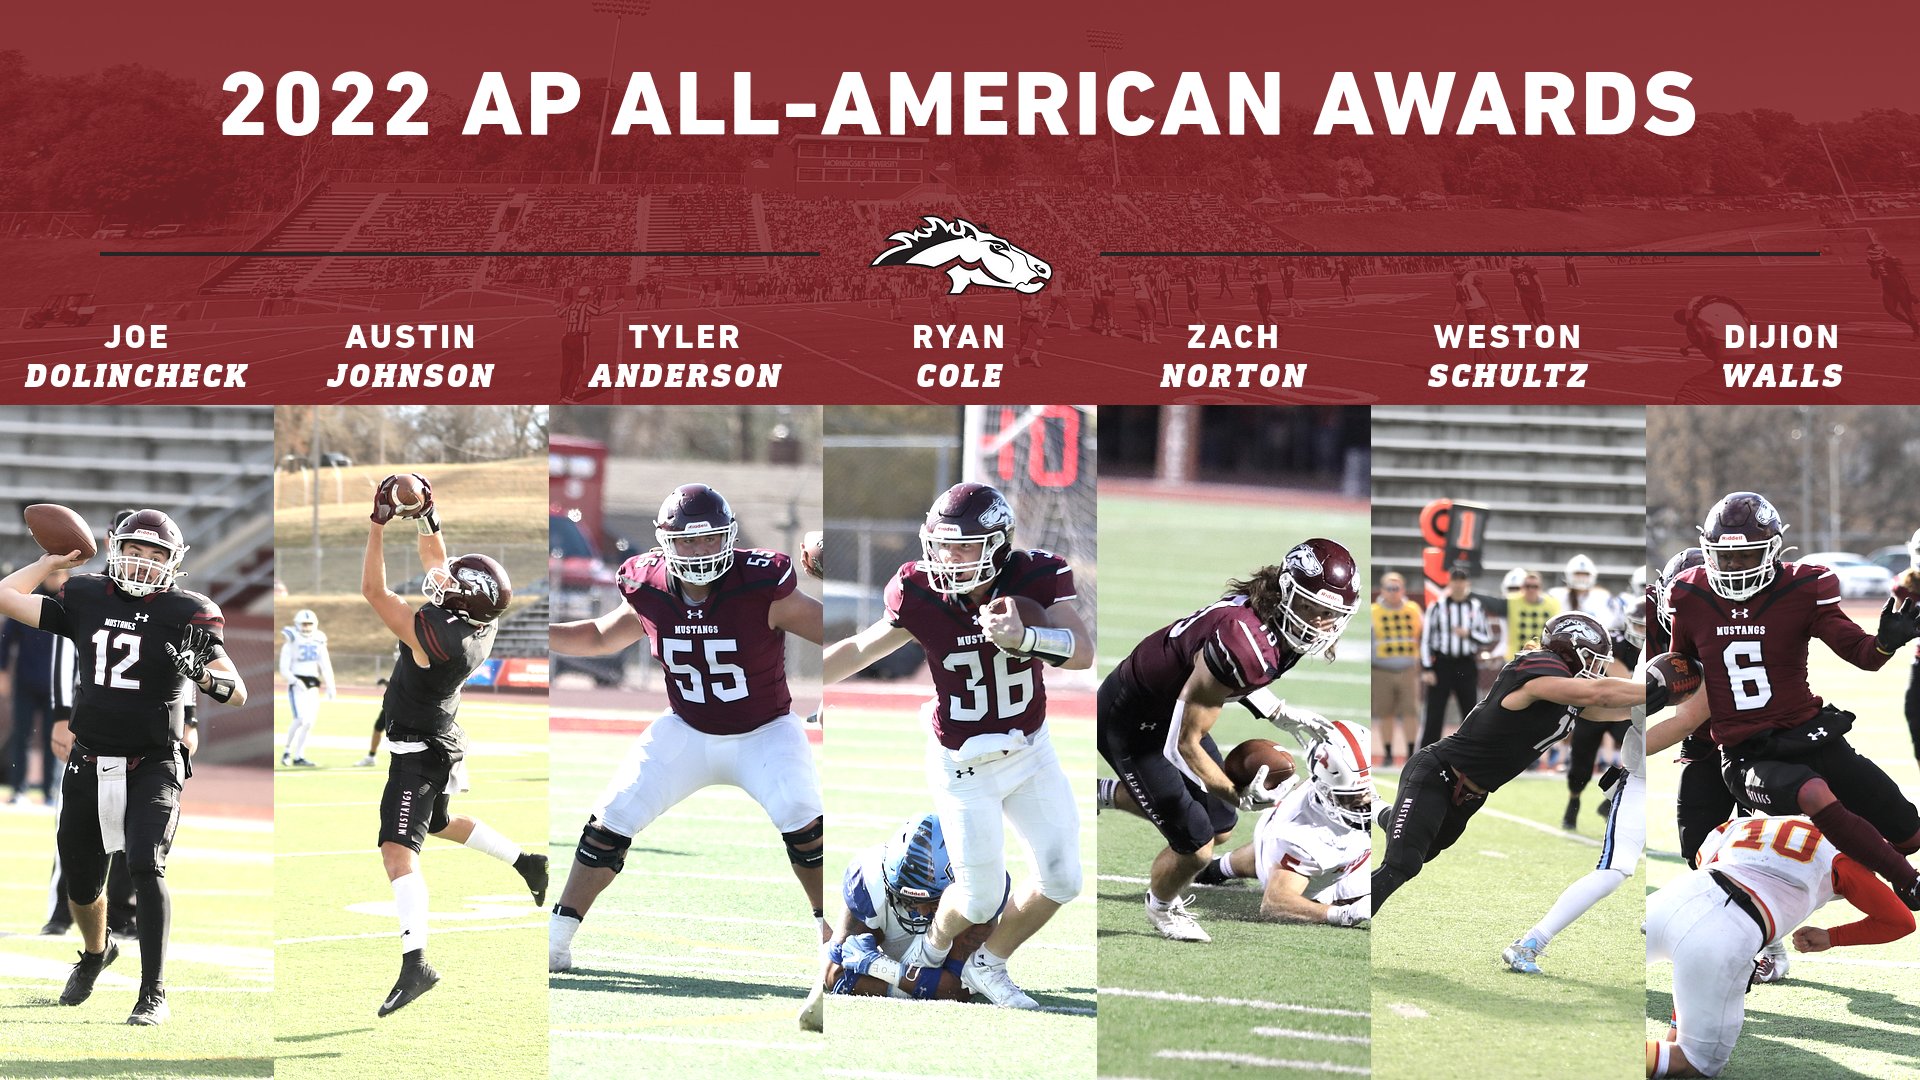 Seven Mustangs included on AP All-American List